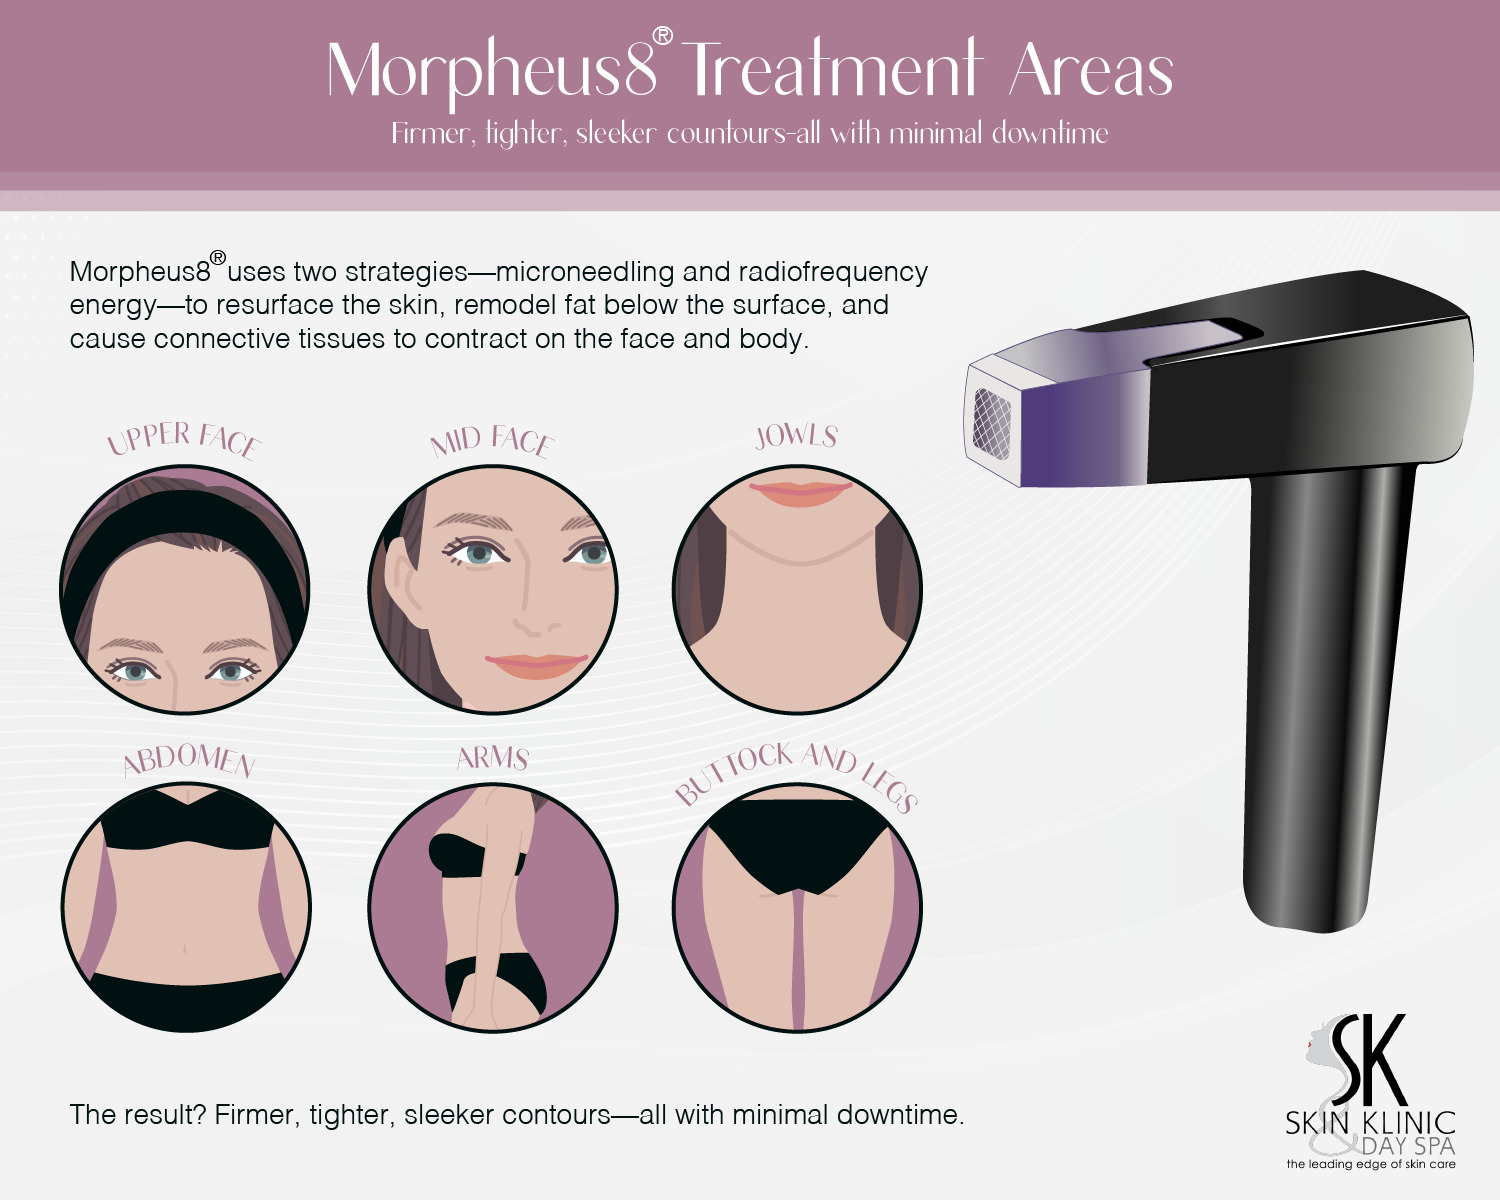 Discover Morpheus8 RF microneedling at Rockland, Maine's Skin Klinic & Day Spa.